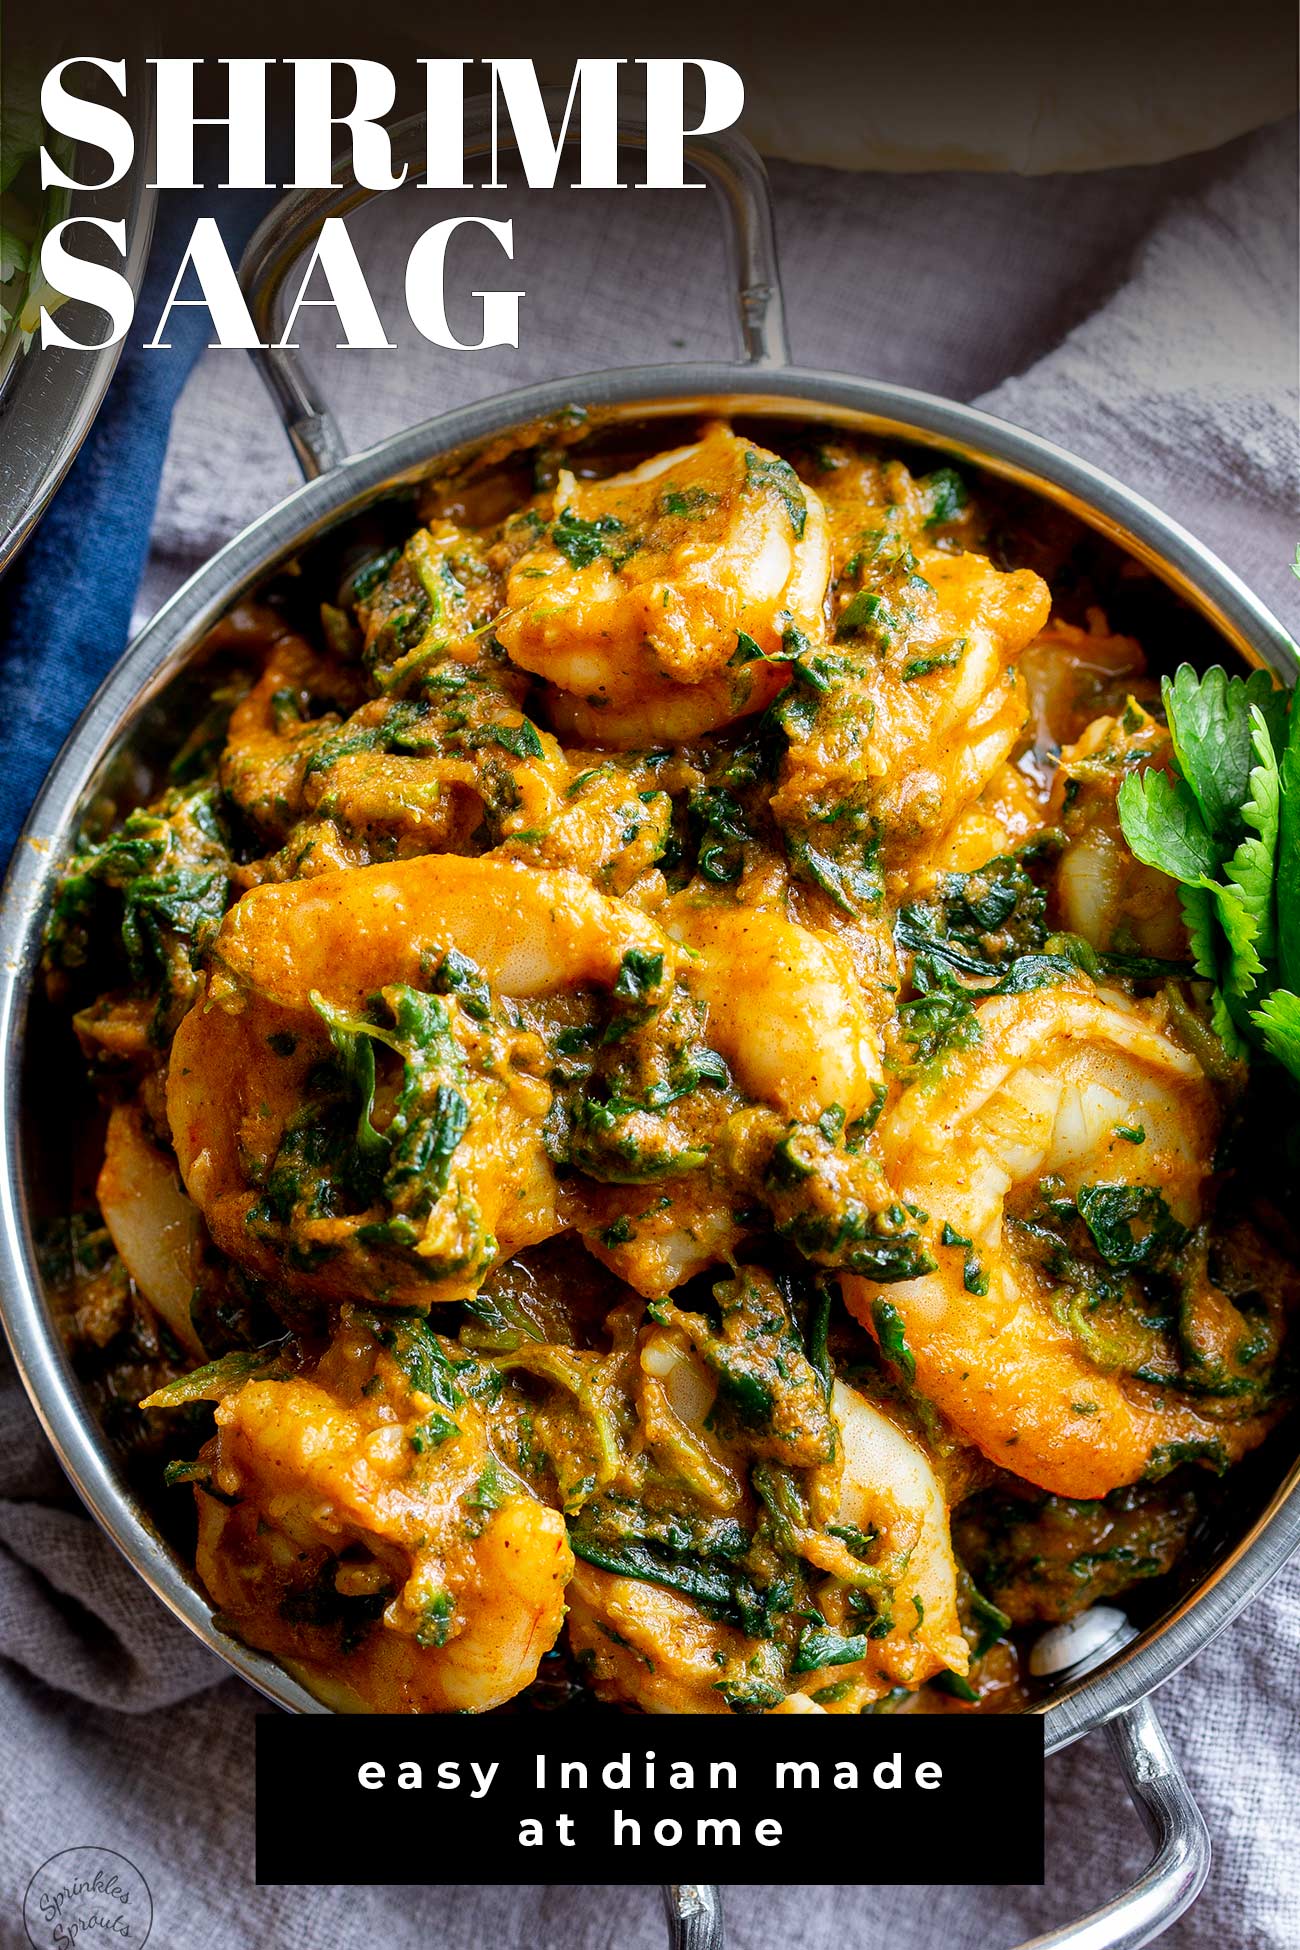 PINTEREST IMAGE: Shrimp Saag with text overlay